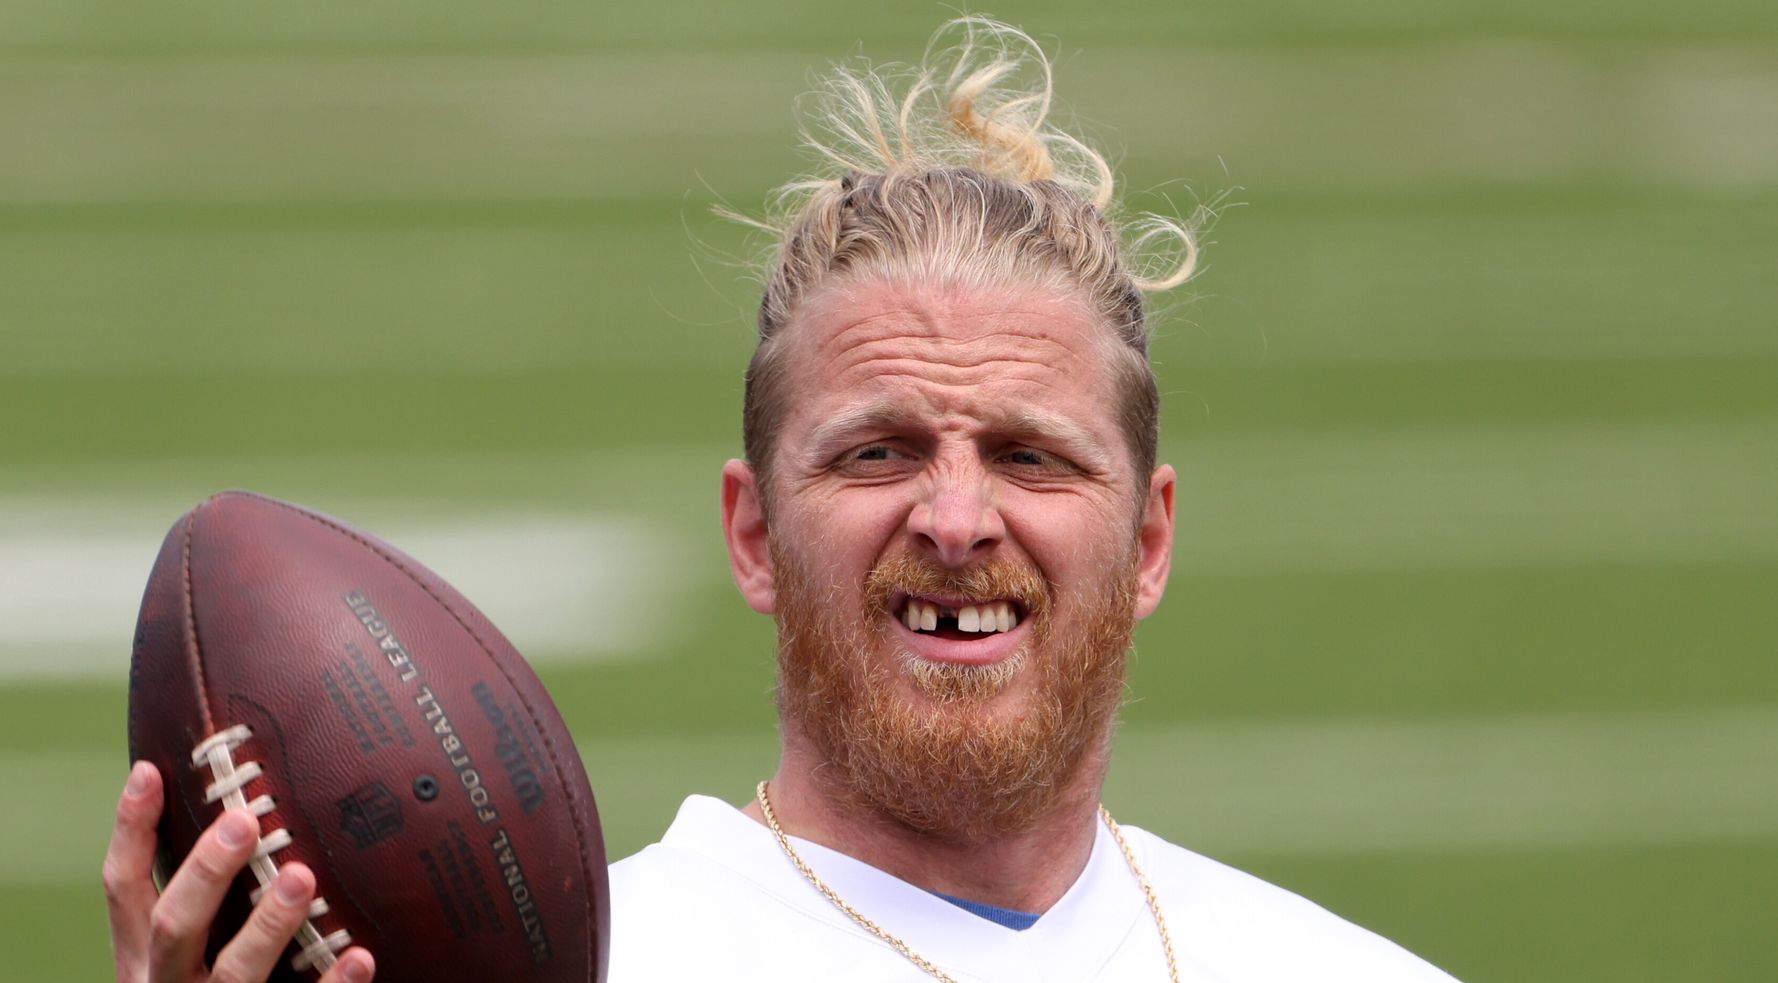 Anti-Vaxxer Cole Beasley Dropped A Pass And The Jokes About Catching Stuff Came Fast